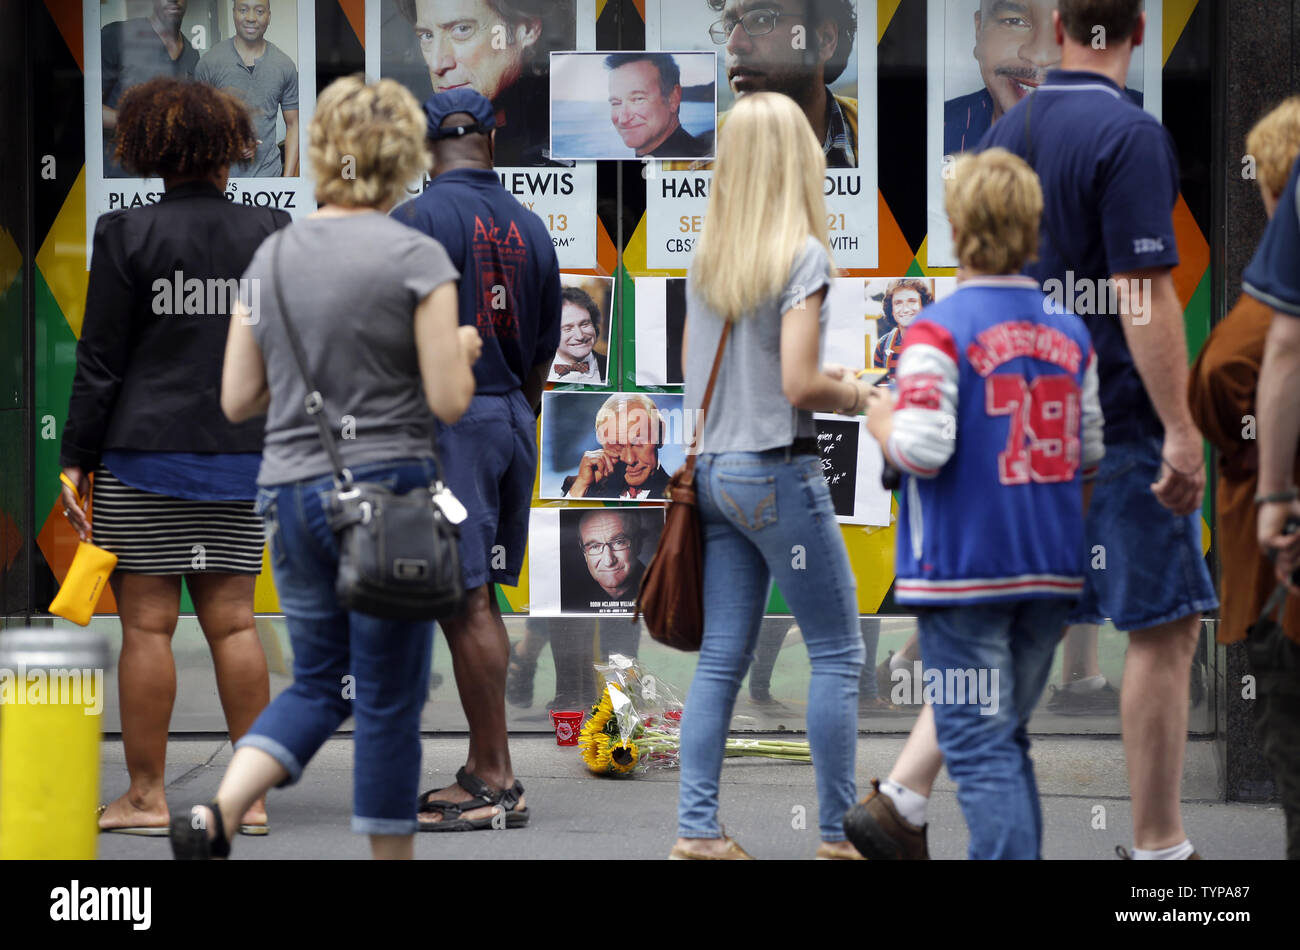 People stop to look at a tribute and memorial to the late Robin Williams at the entrance to Carolines on Broadway comedy club in New York City on August 12, 2014. Robin Williams committed suicide by hanging himself with a belt, the coroner said Tuesday in a press conference detailing the preliminary findings surrounding the actor and comedian's death.          UPI/John Angelillo Stock Photo